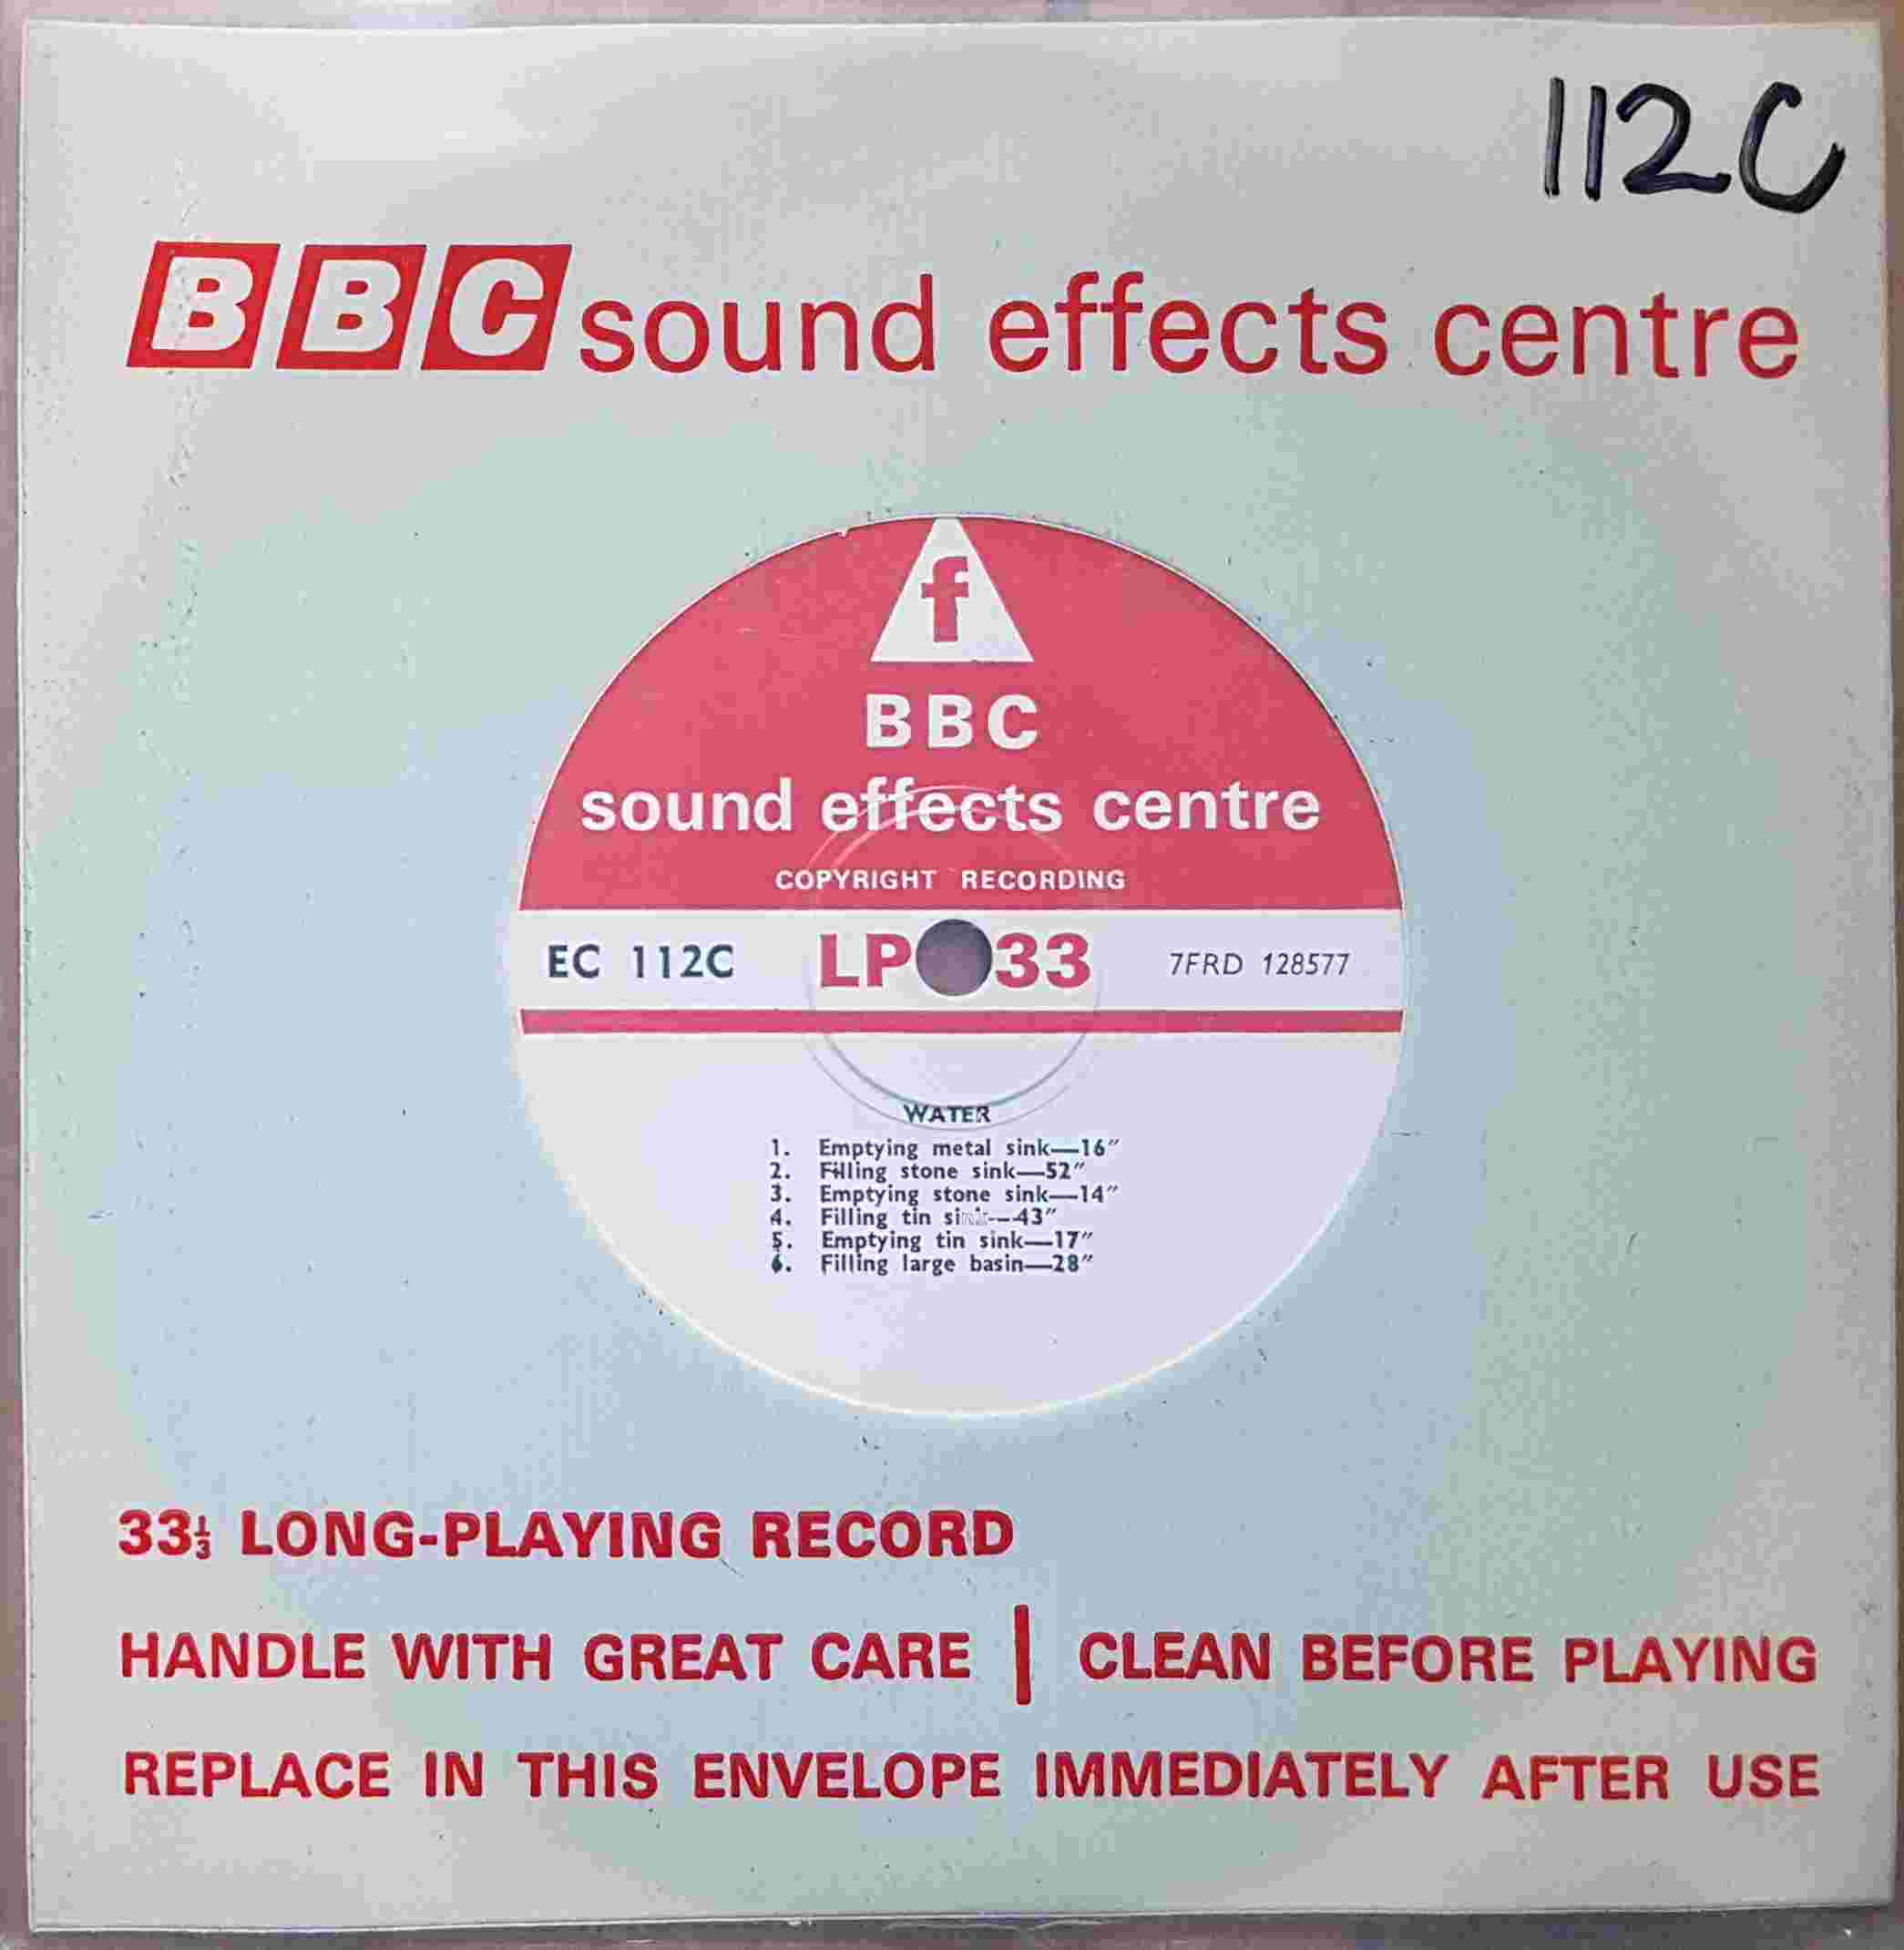 Picture of EC 112C Water by artist Not registered from the BBC singles - Records and Tapes library